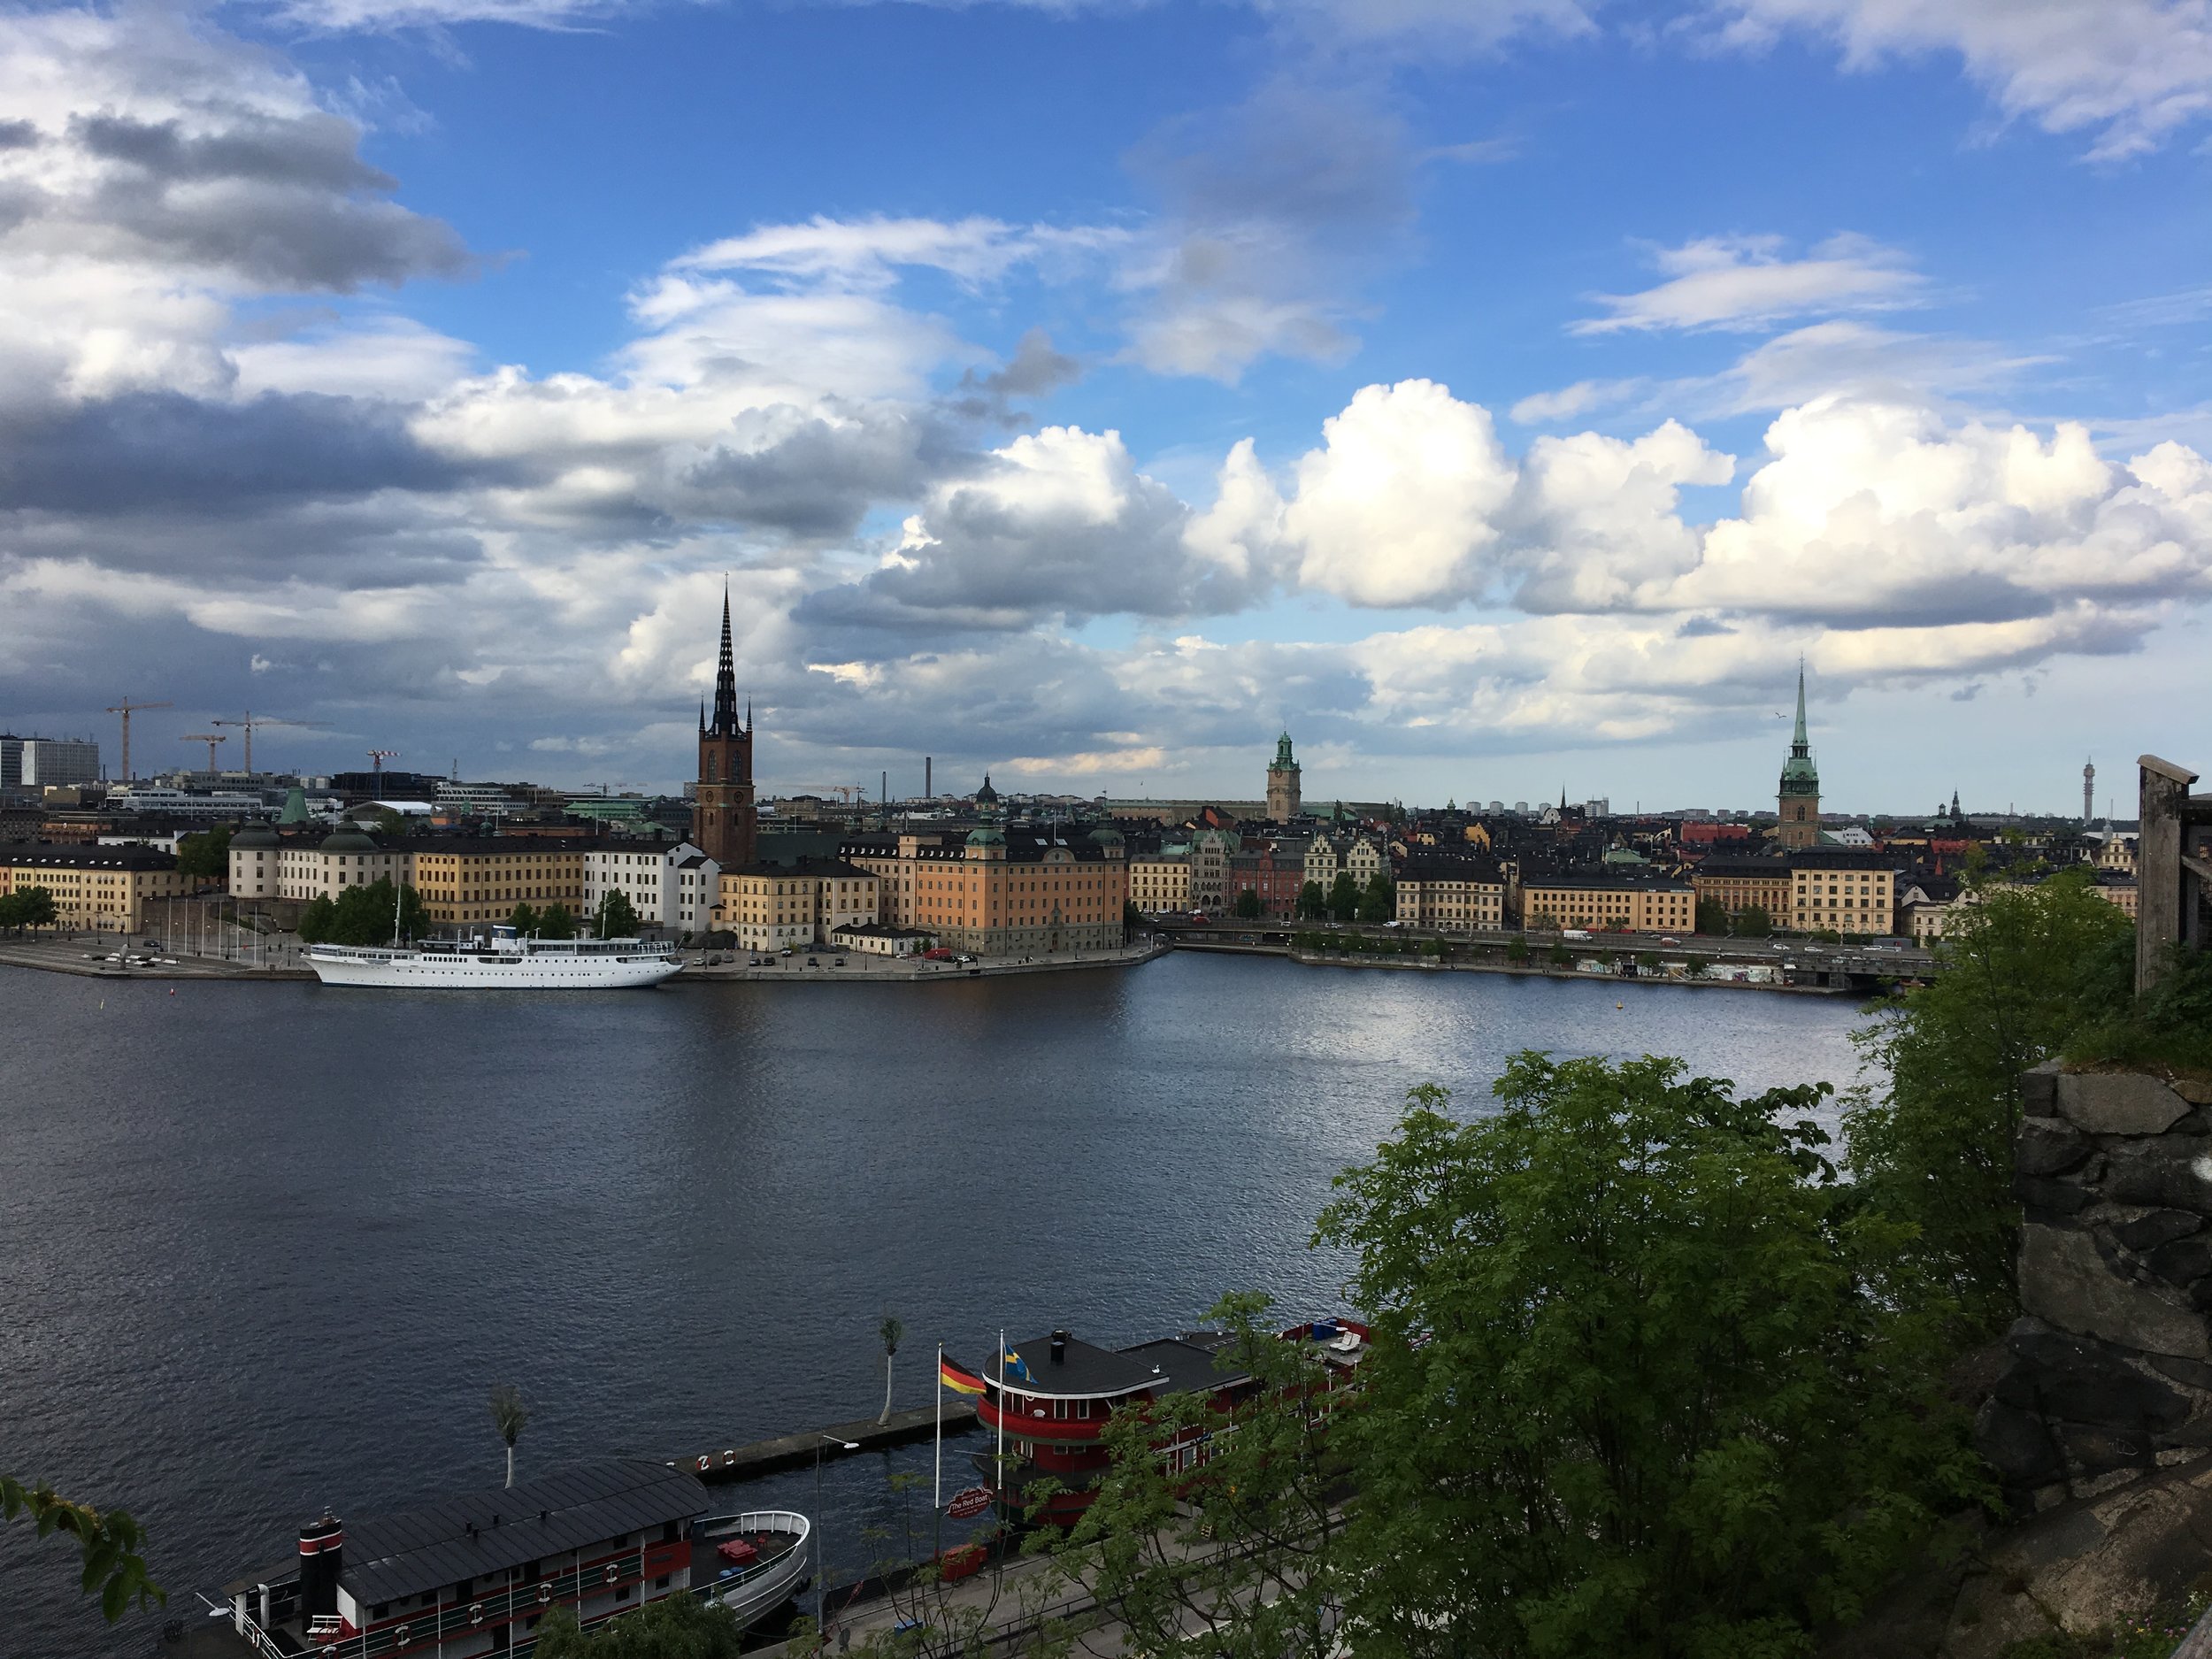 View from Sodermalm.  We will miss this beauty!